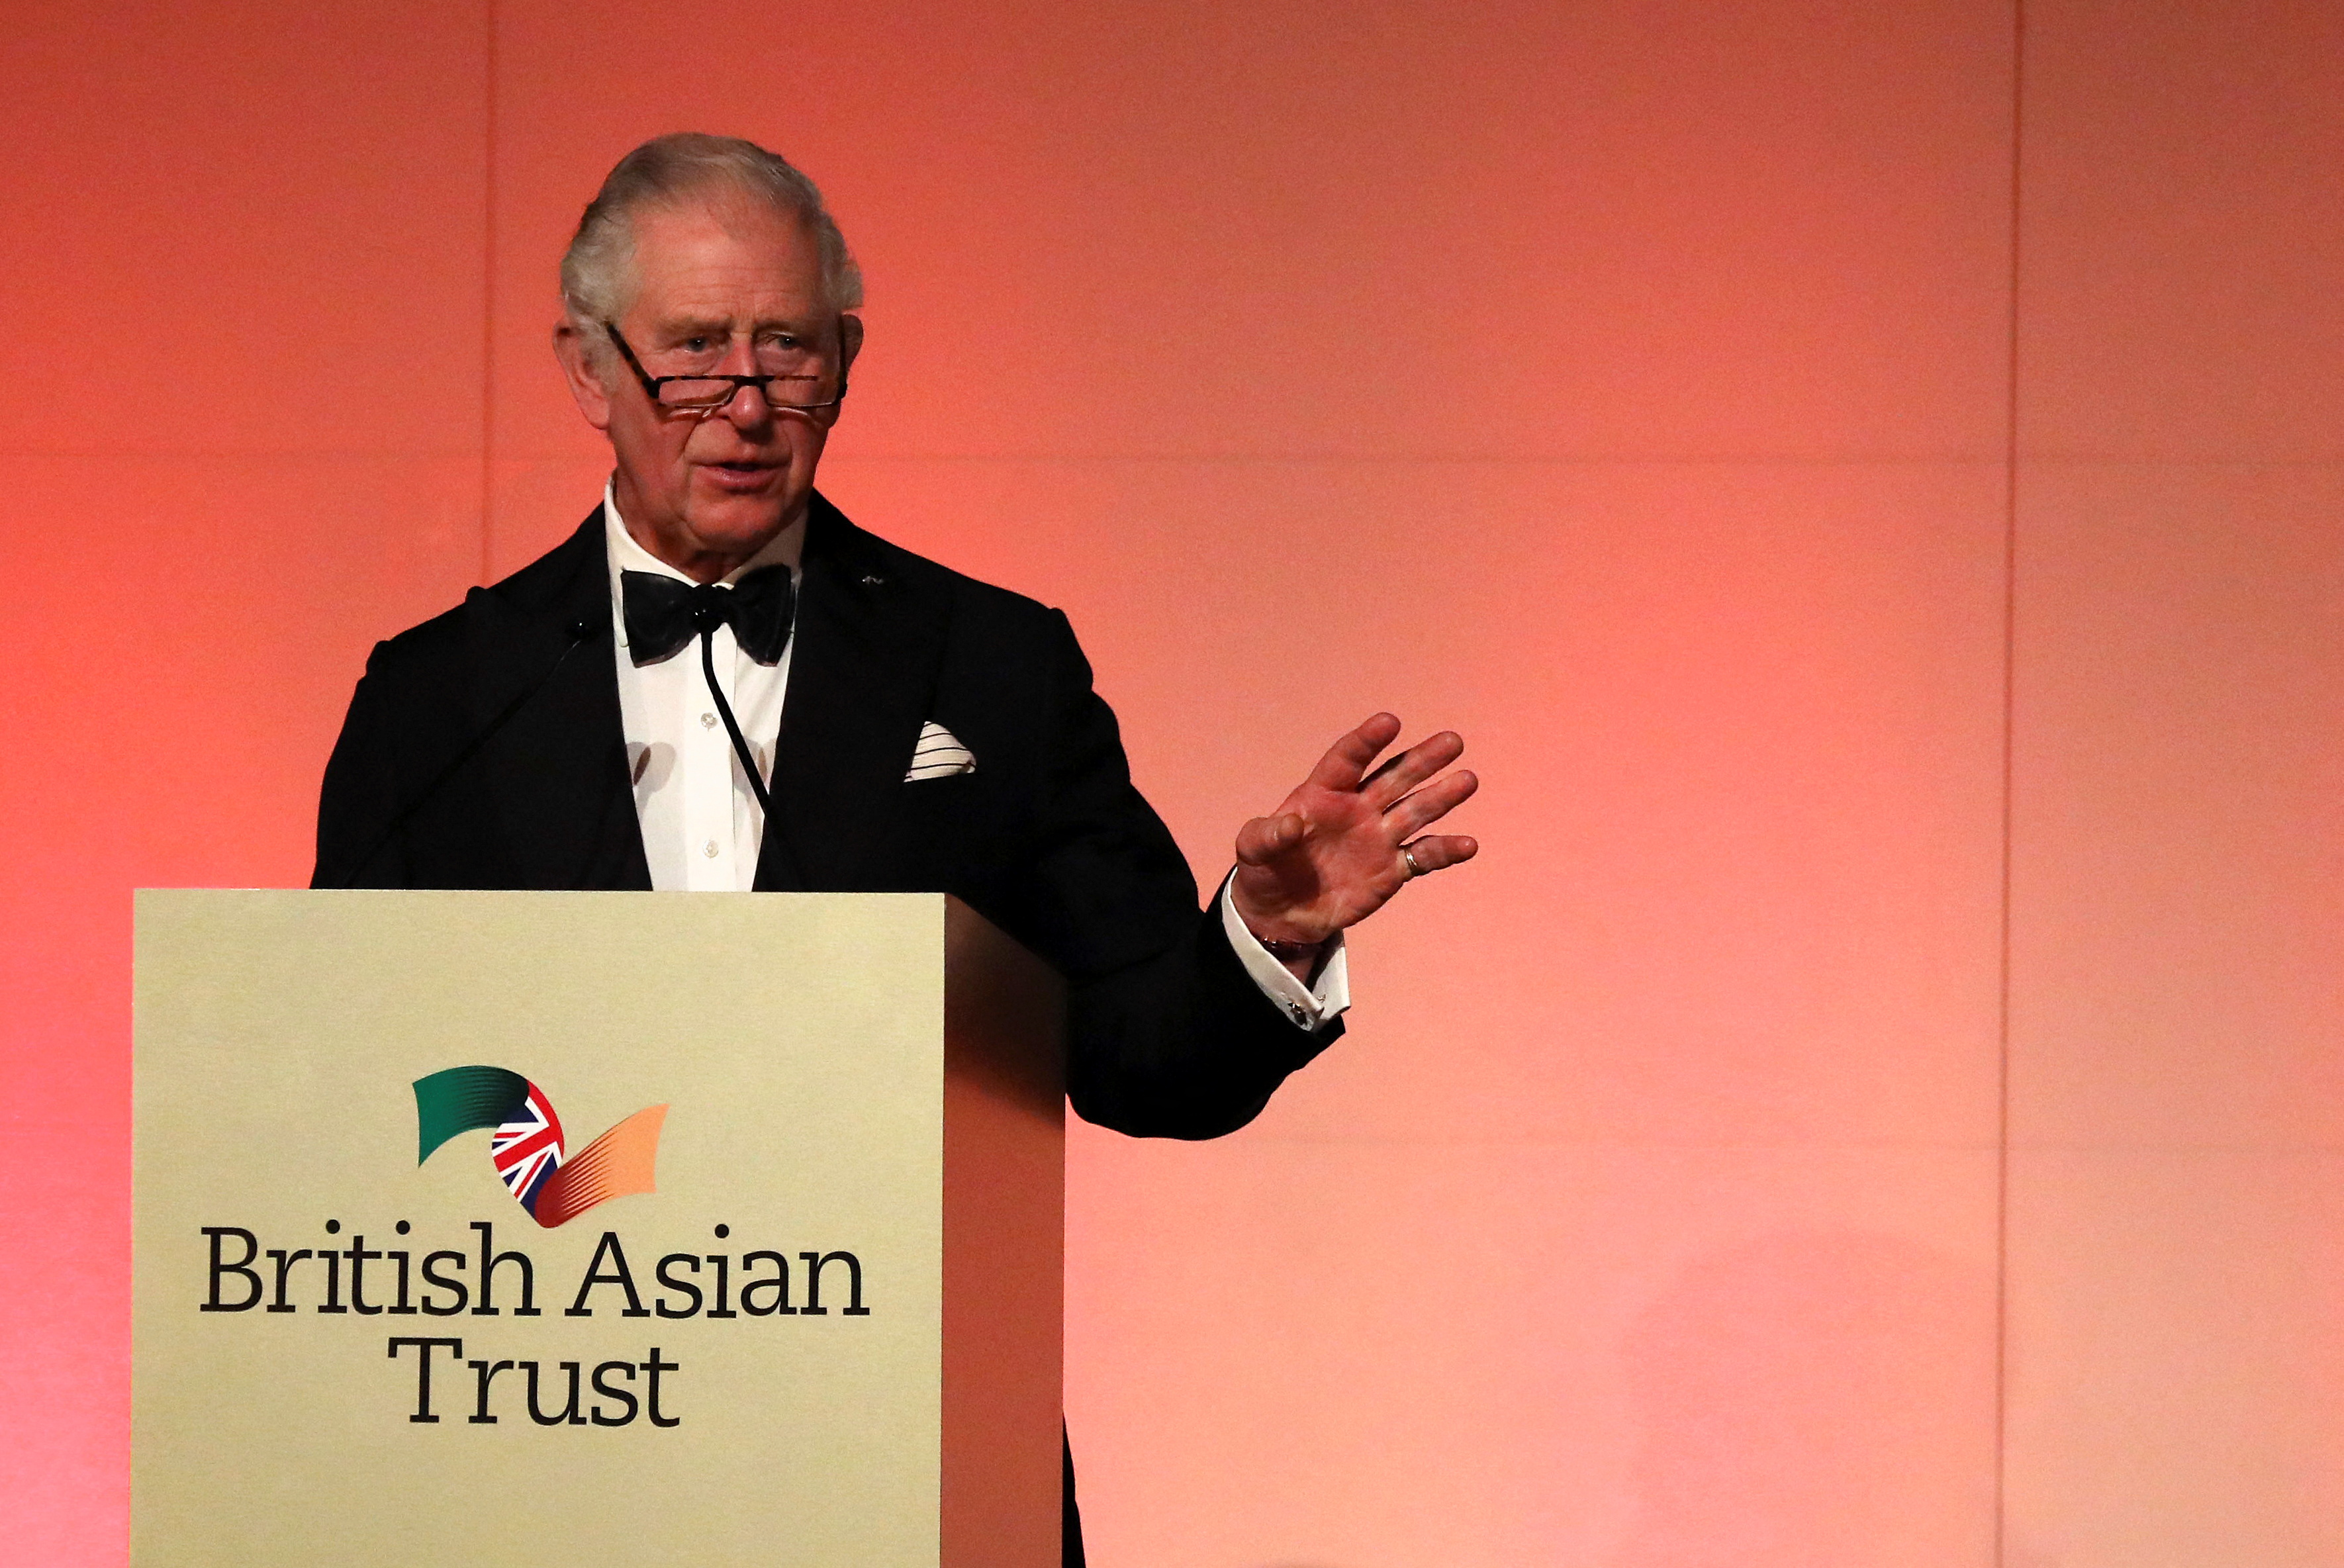 Britain's Prince Charles and Camilla, Duchess of Cornwall, celebrate the British Asian Trust, in London